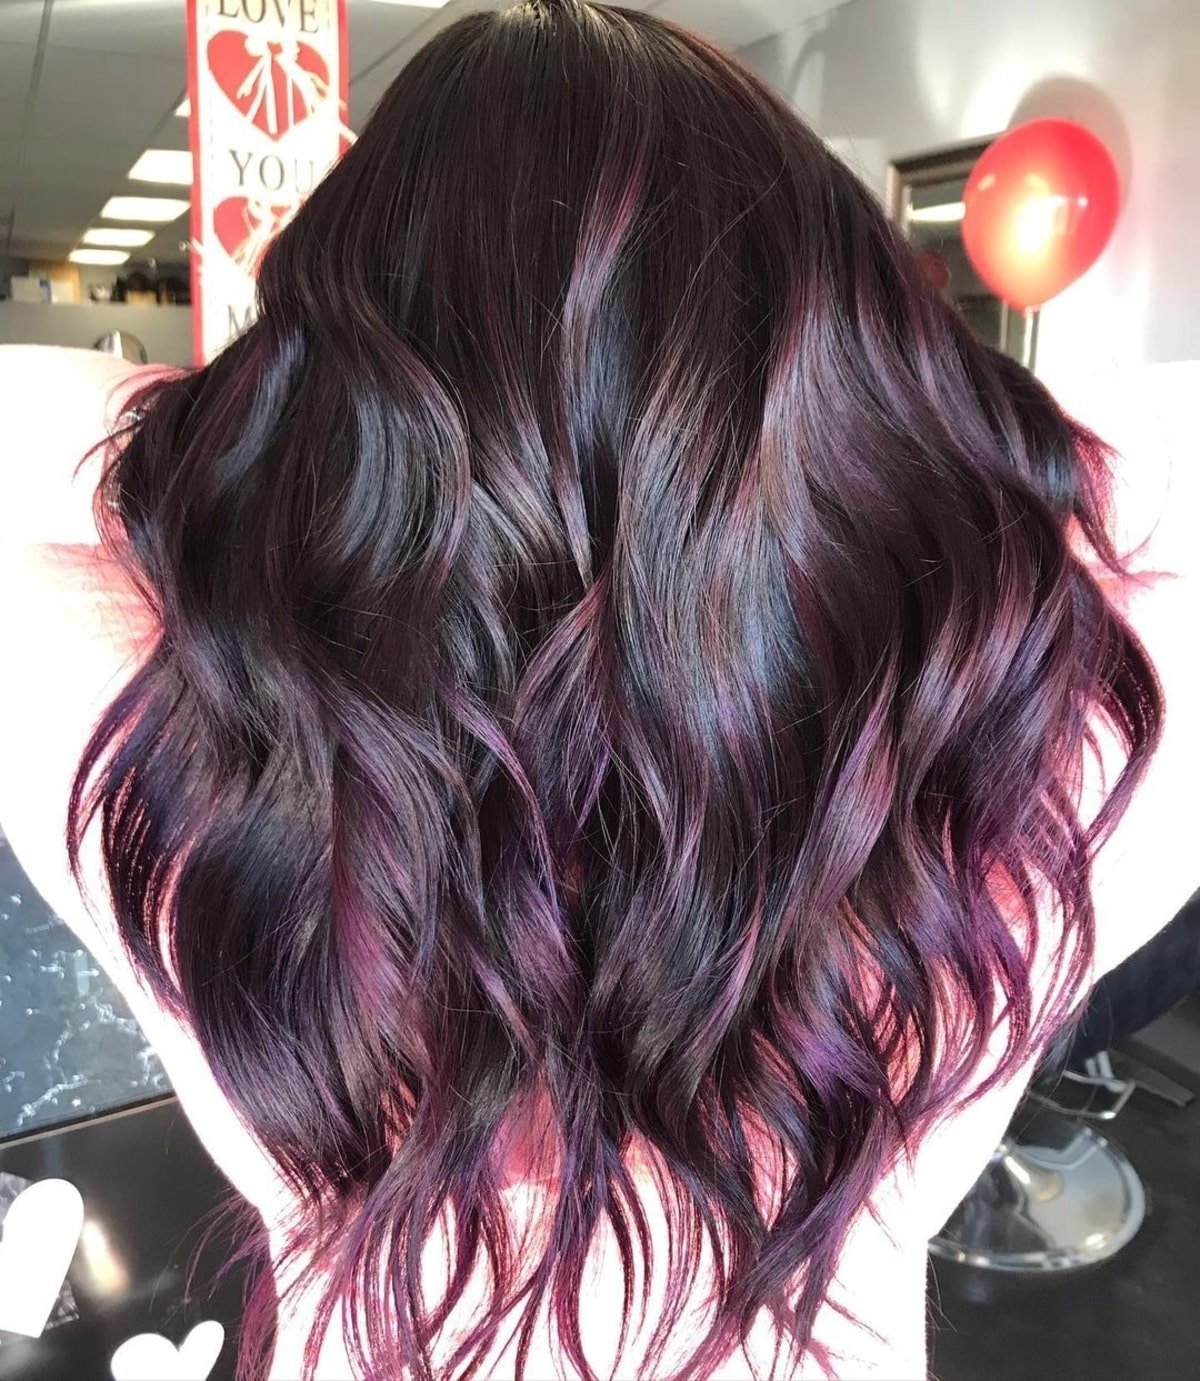 Chocolate and violet highlights